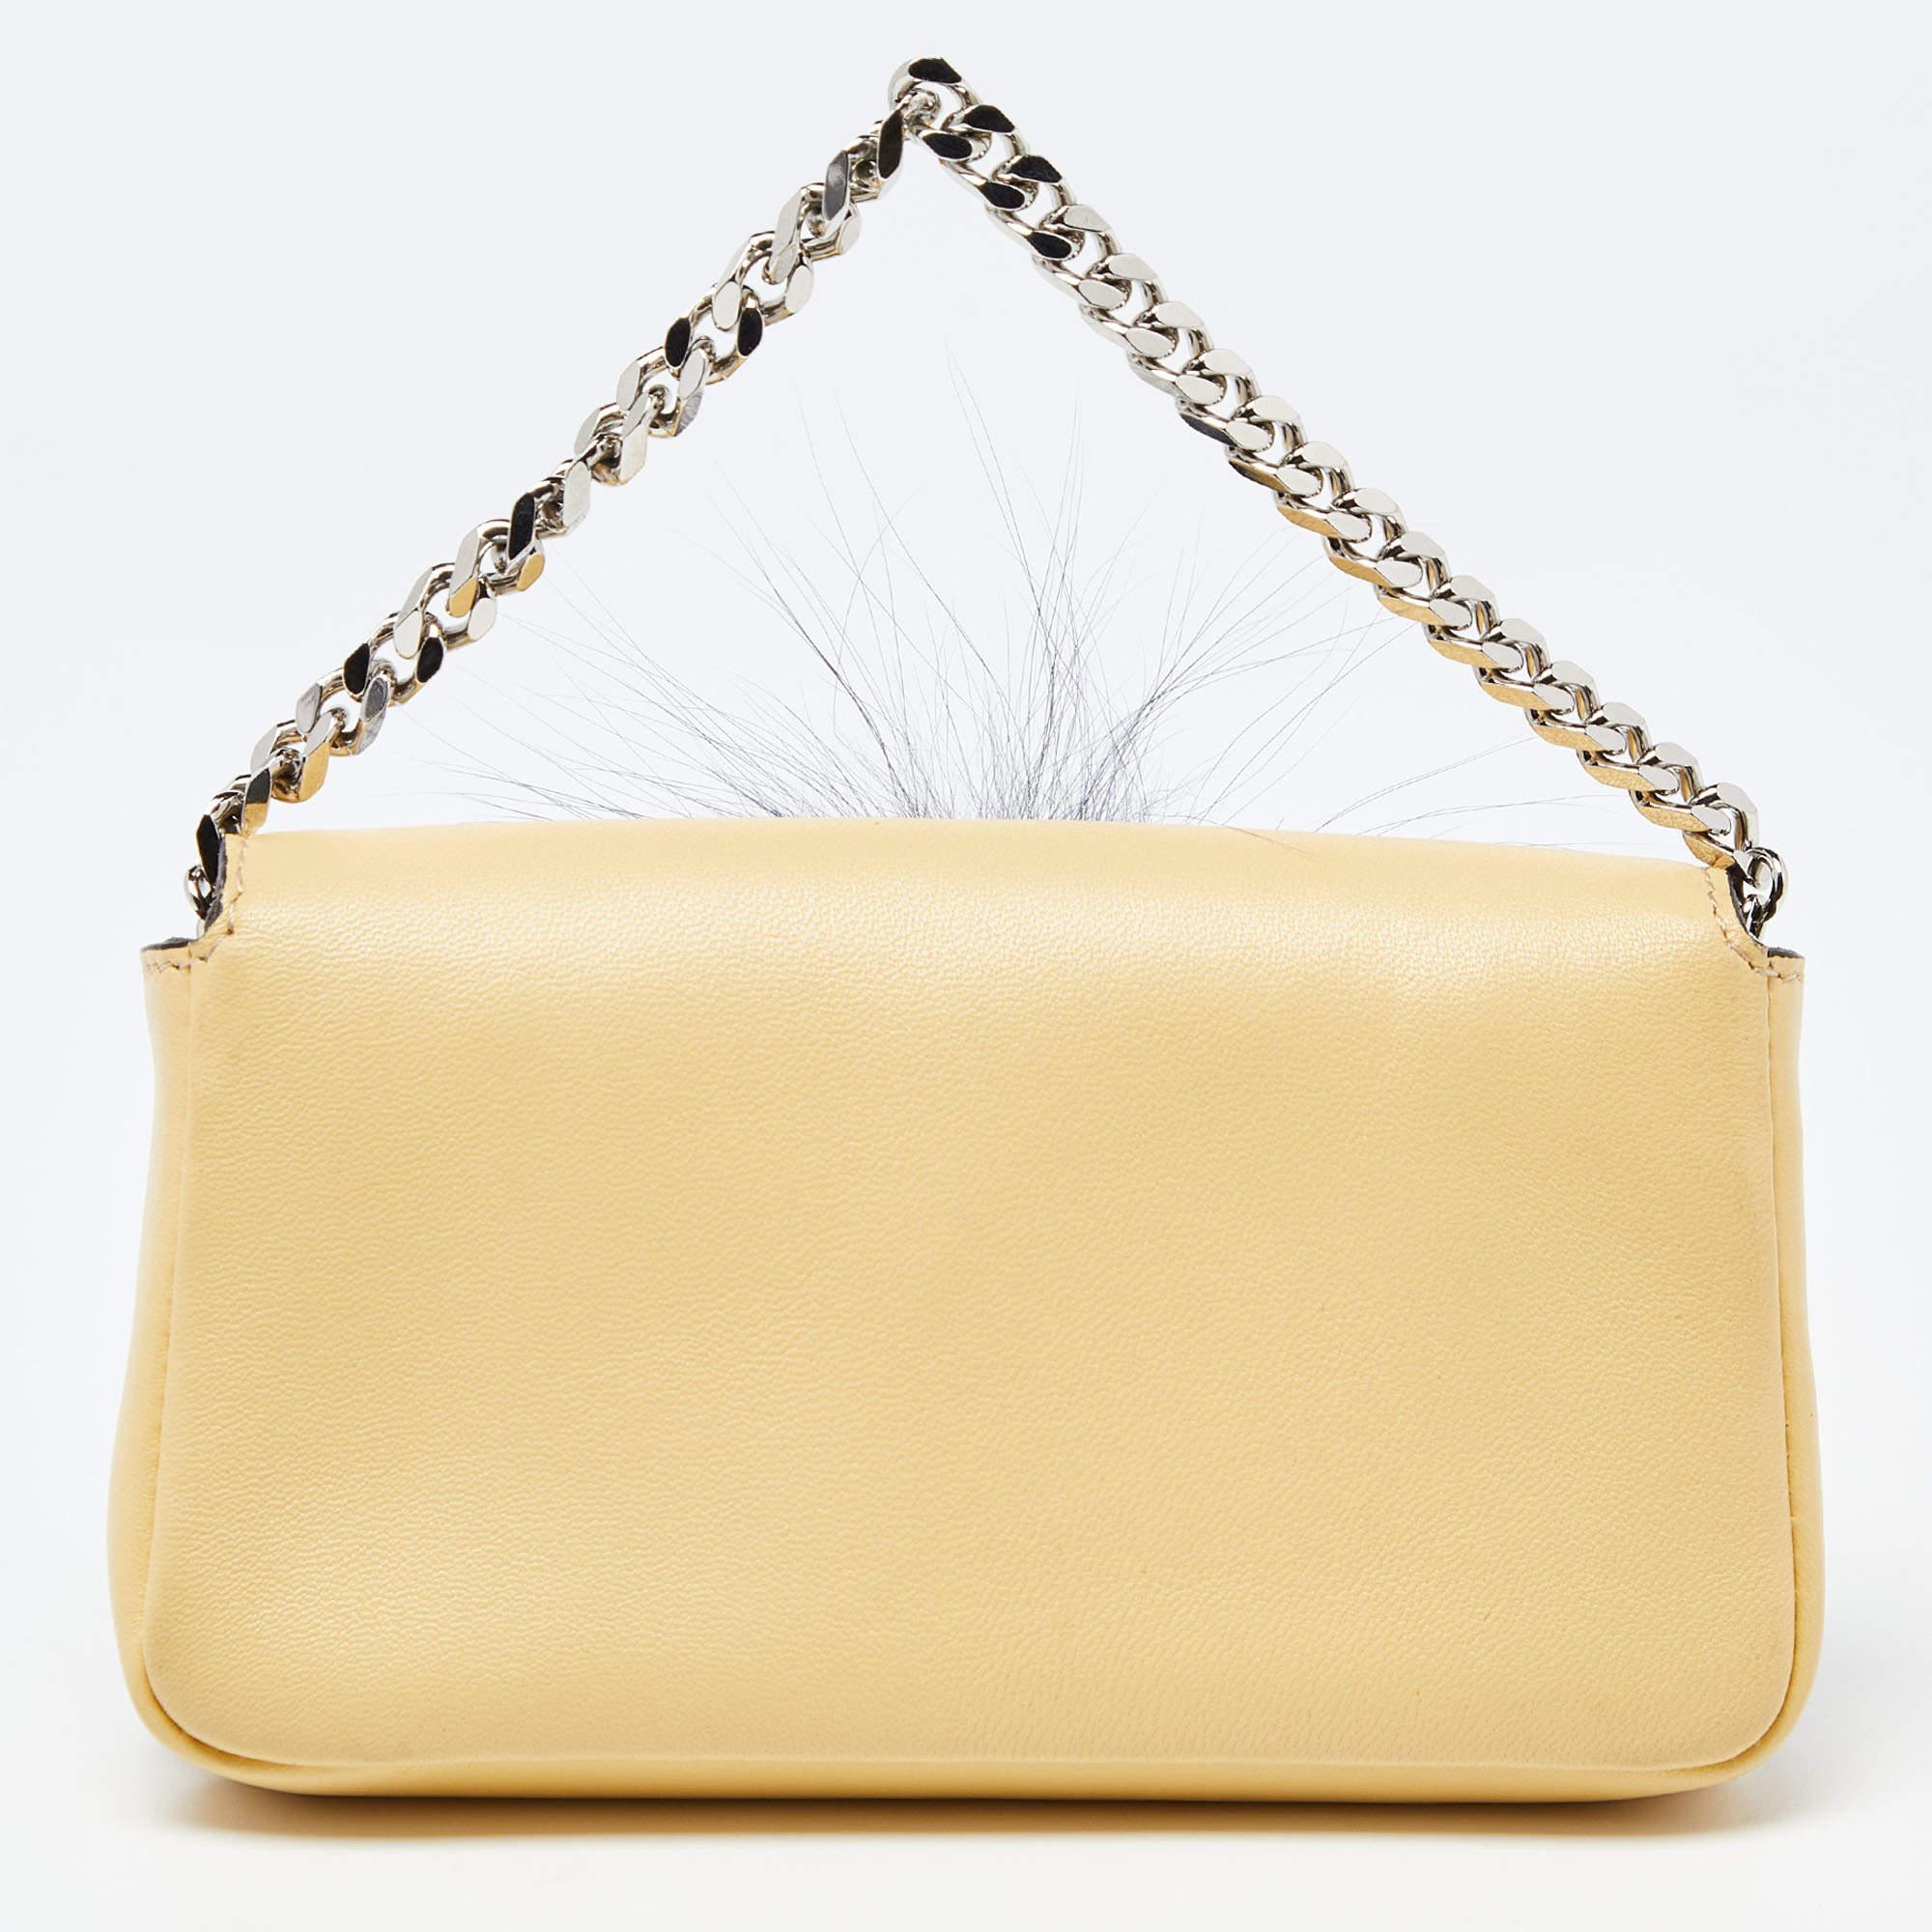 Fendi Yellow Leather and Fur Micro Monster Baguette Bag In Good Condition For Sale In Dubai, Al Qouz 2